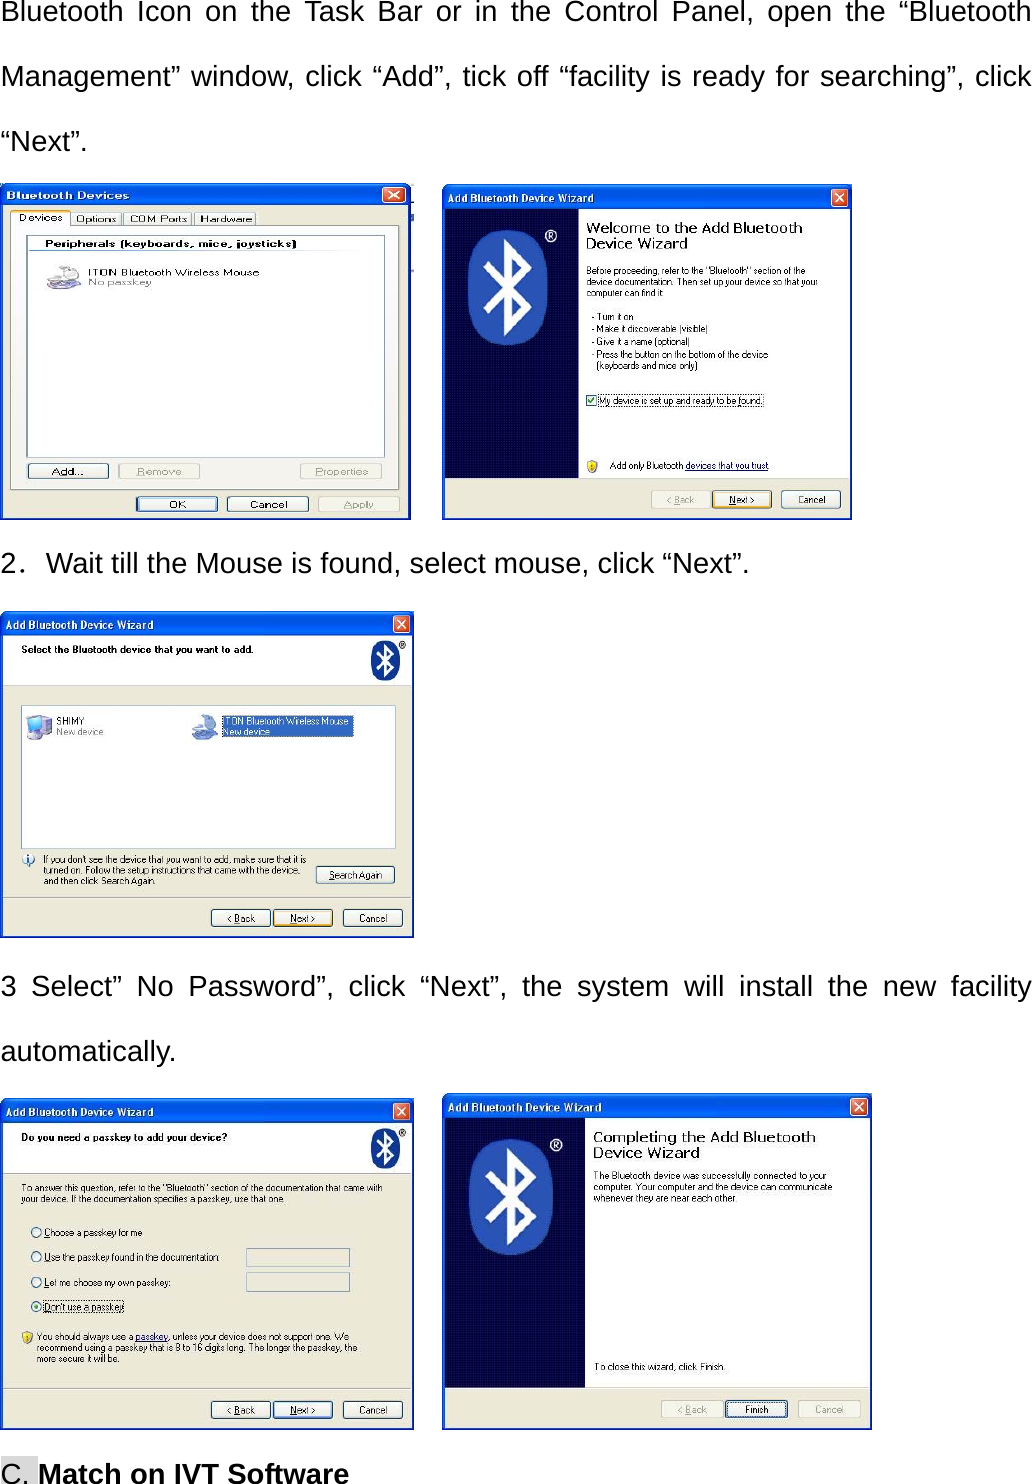   Bluetooth Icon on the Task Bar or in the Control Panel, open the “Bluetooth Management” window, click “Add”, tick off “facility is ready for searching”, click “Next”.     2．Wait till the Mouse is found, select mouse, click “Next”.  3 Select” No Password”, click “Next”, the system will install the new facility automatically.     C. Match on IVT Software 